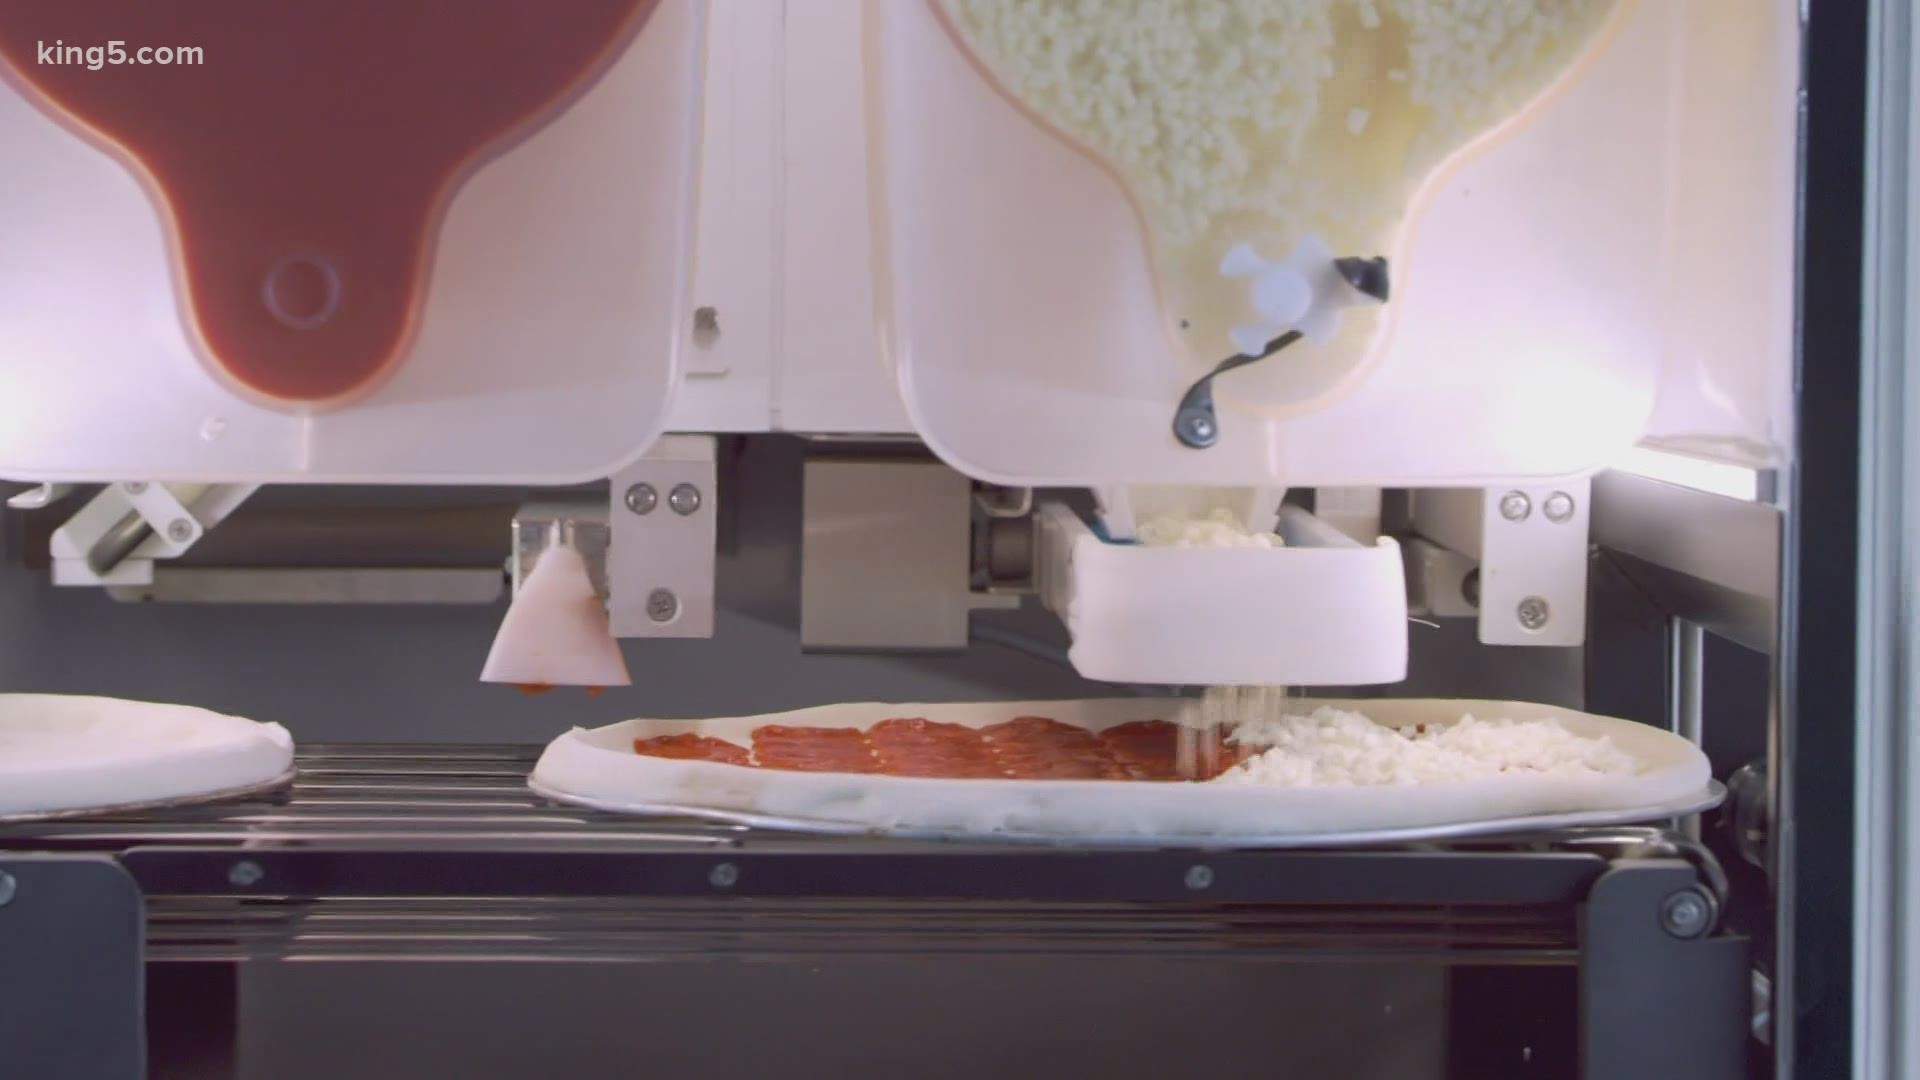 Jobtilbud illoyalitet Søg The world now is ready for this pizza-making robot made in Seattle |  king5.com